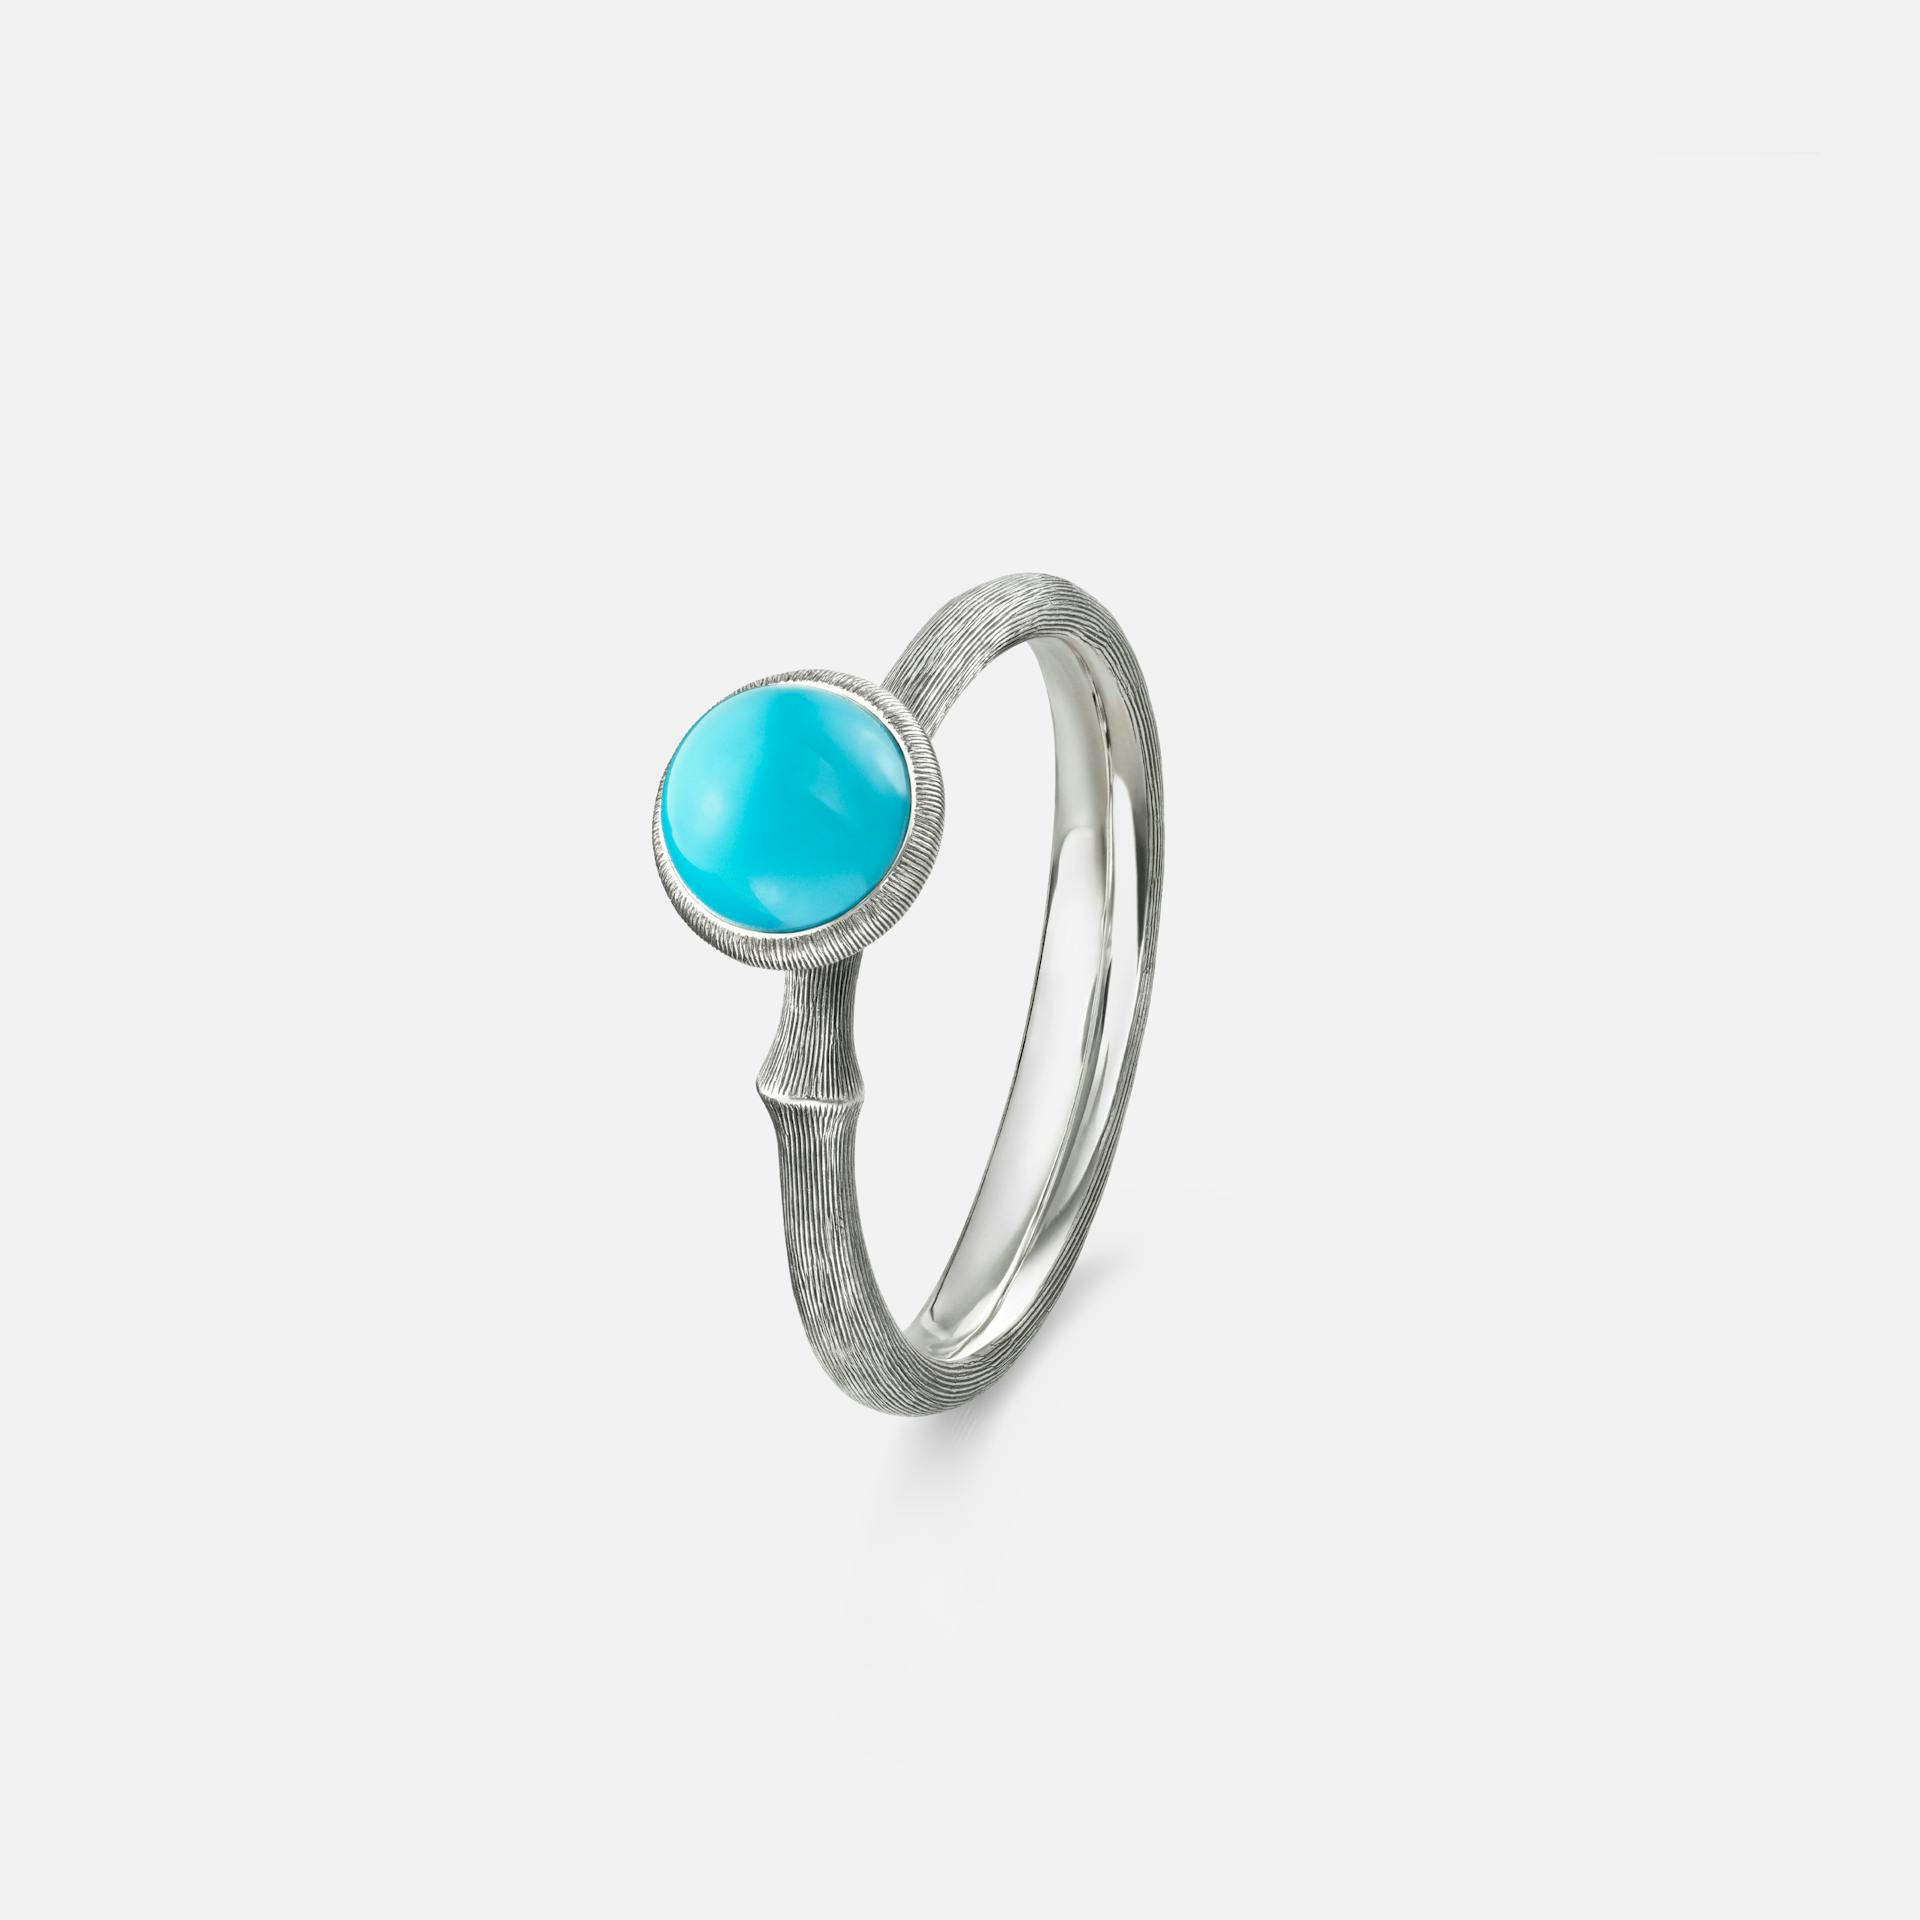 Lotus Ring size 0 in Oxidized Sterling Silver with Turquoise  |  Ole Lynggaard Copenhagen